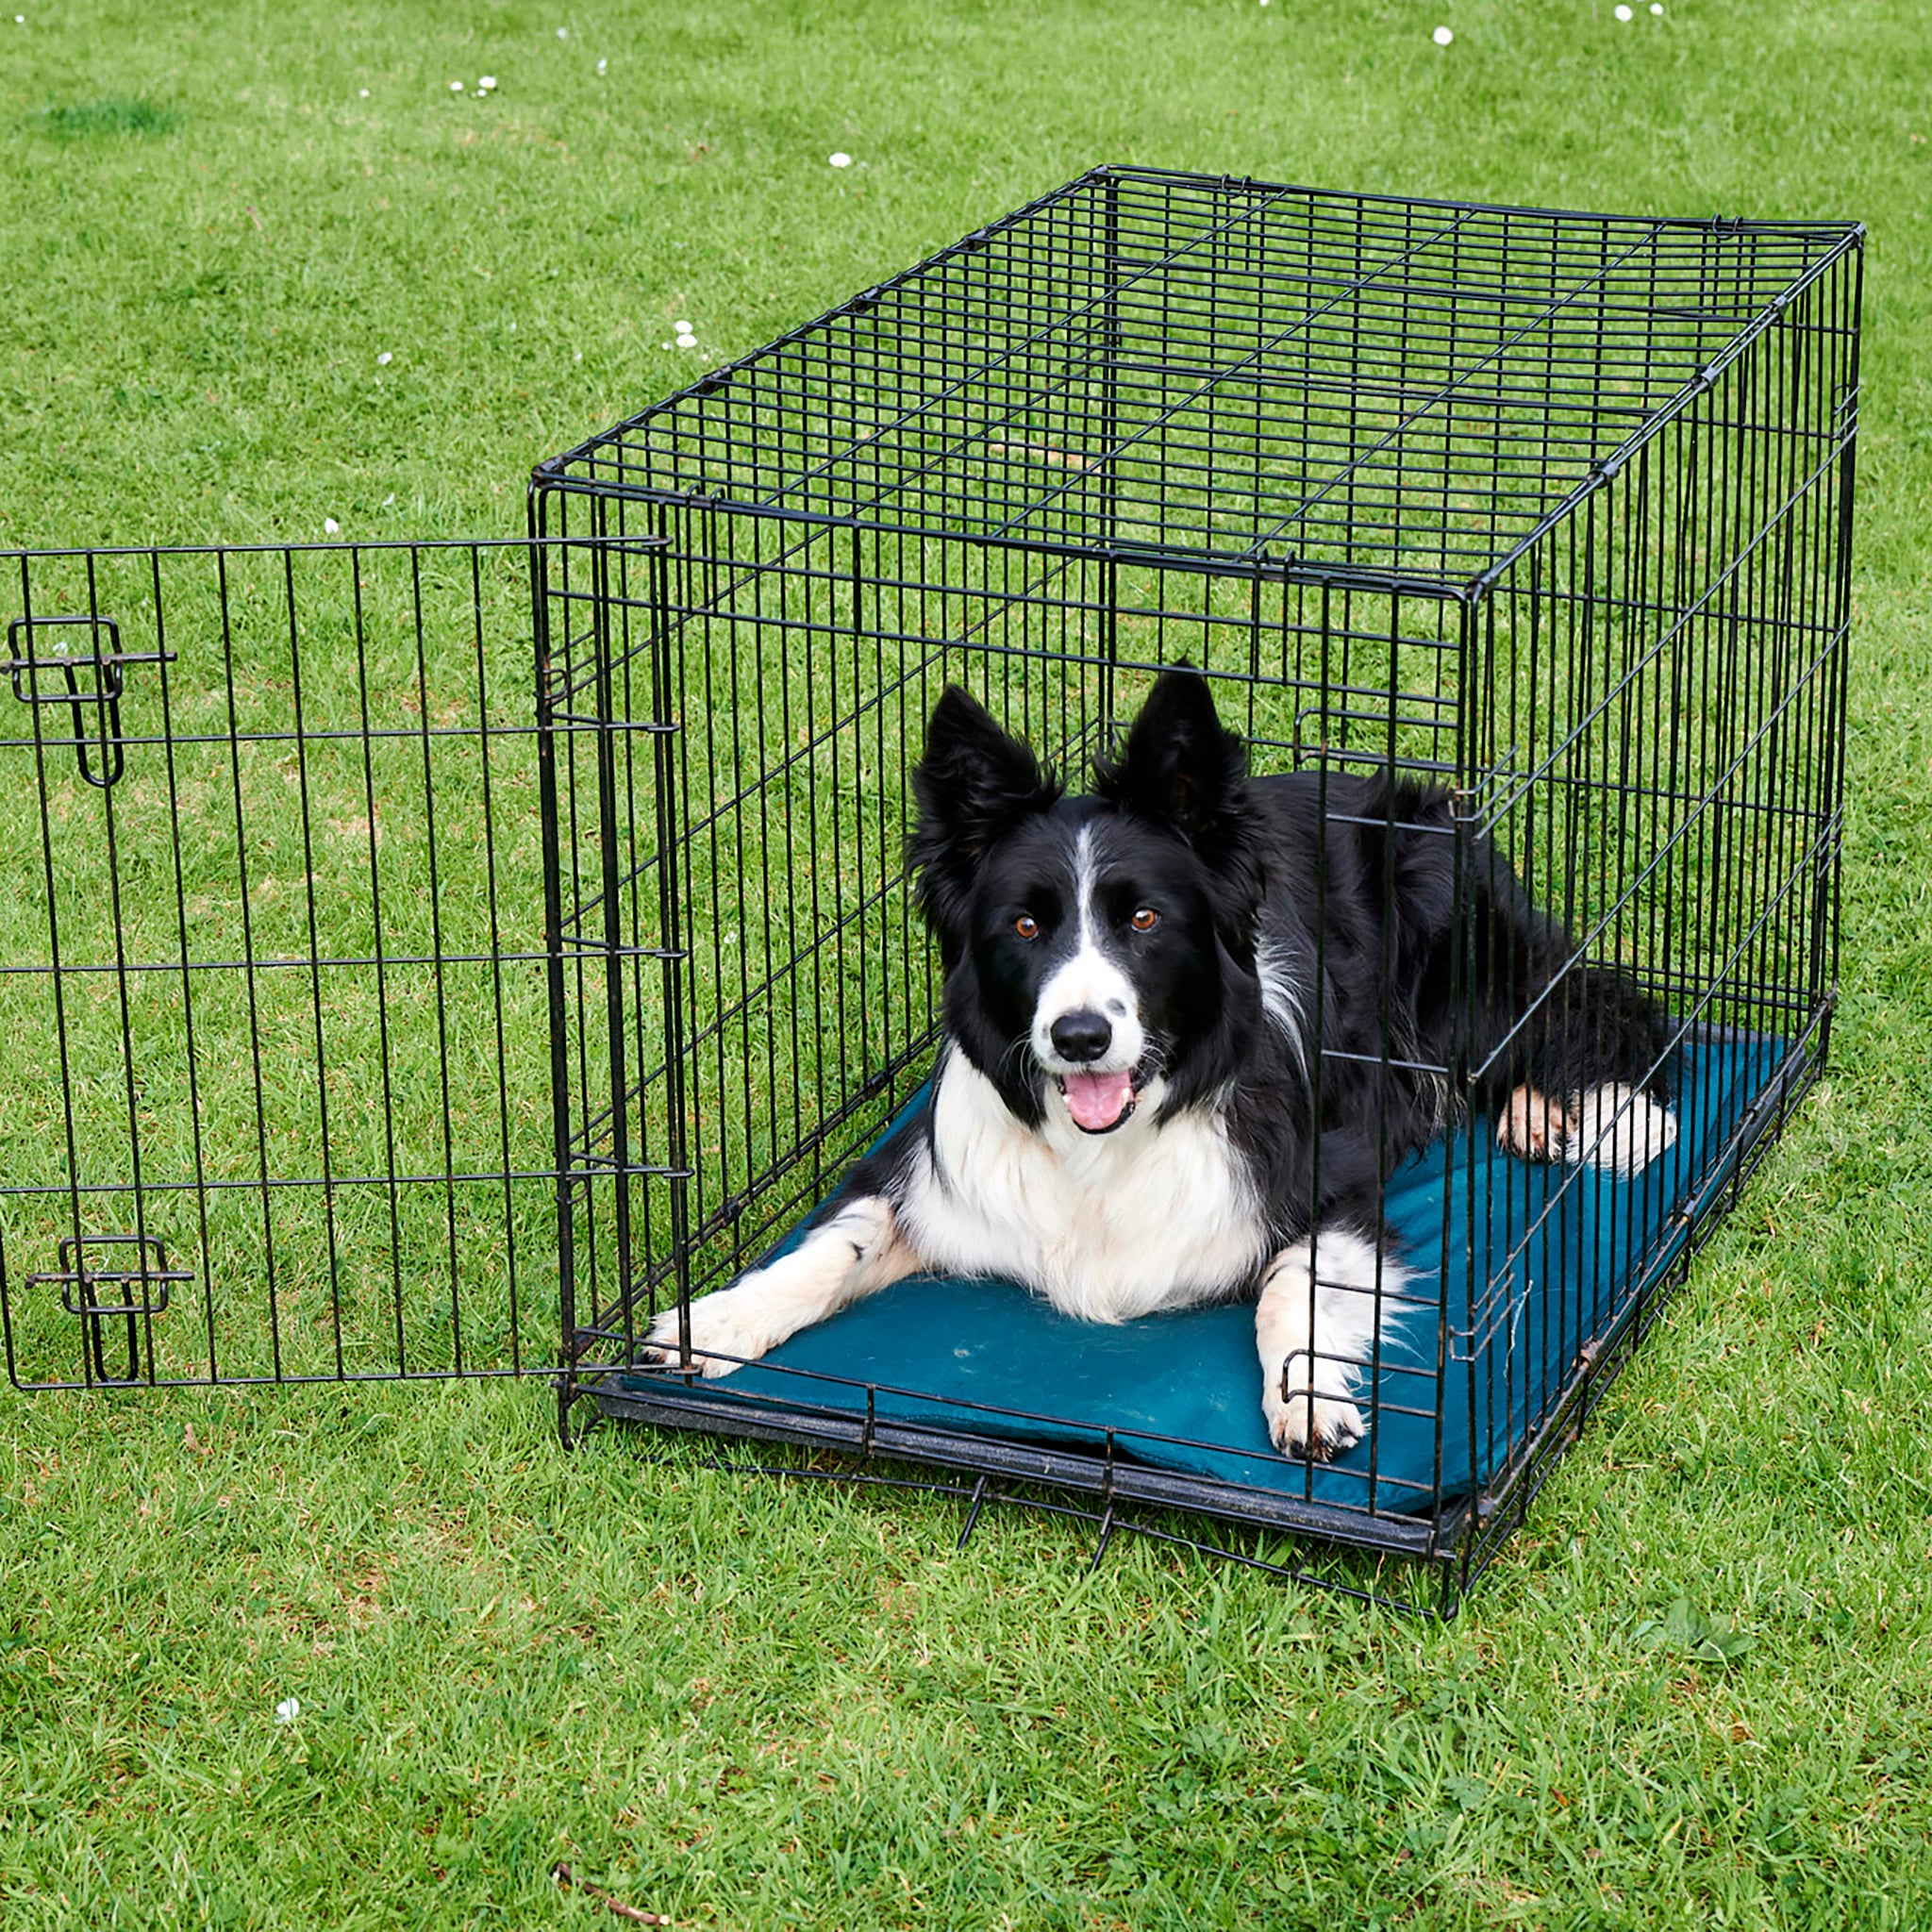 A black metal crate, with a green eco-friendly crate liner inside, filled with wool. The crate is placed on the grass at an angle. Inside the crate there is a black and white long haired border collie dog! The dog is laid down staring directly forward. the dog looks pert. The crate is facing forward.